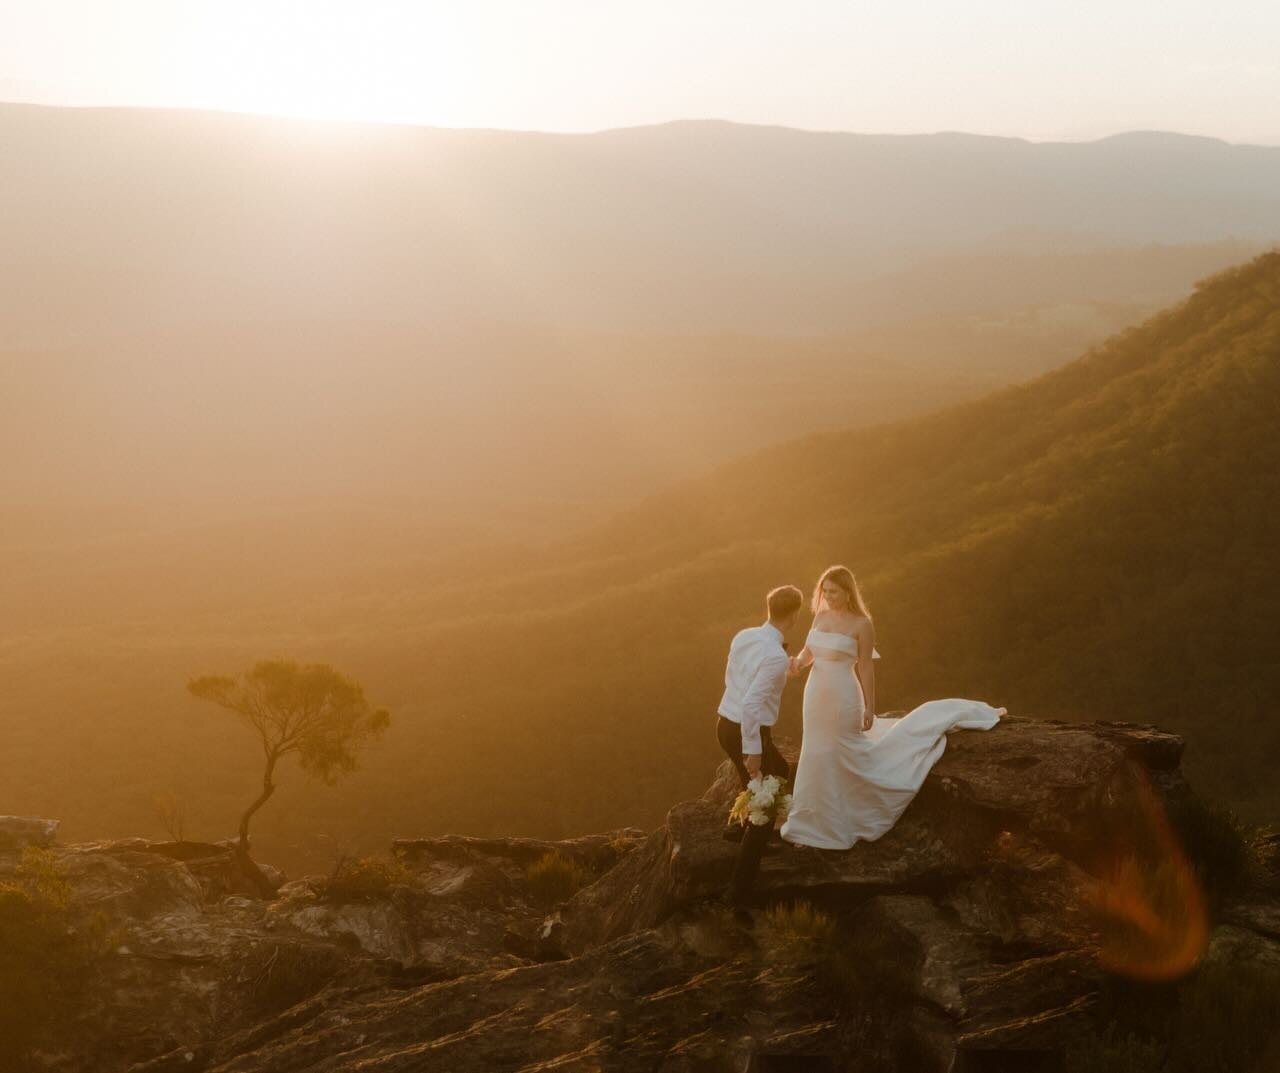 J &amp; C // after wedding Shooting - Blue Mountains, Australia. ✨

I&rsquo;m still not over how beautiful this evening was. I hope you guys like all the love during this burning Aussie sunset as much as I do. 🔥 #afterweddingshooting 

It&rsquo;s al